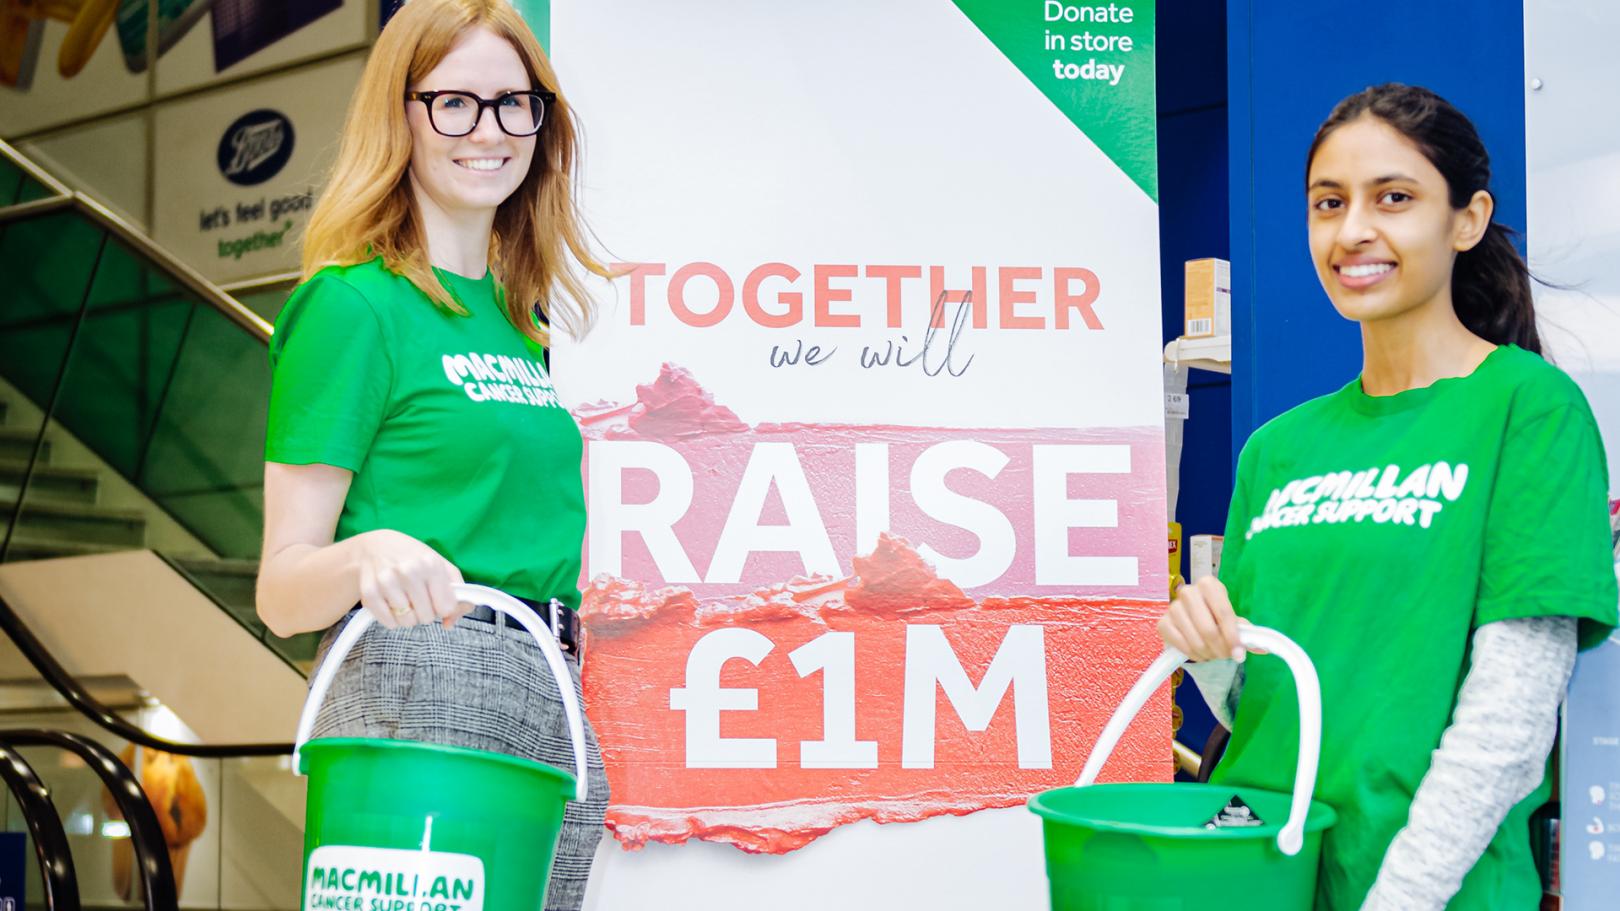 Two MacMillan volunteers holding donation buckets smiling at the camera